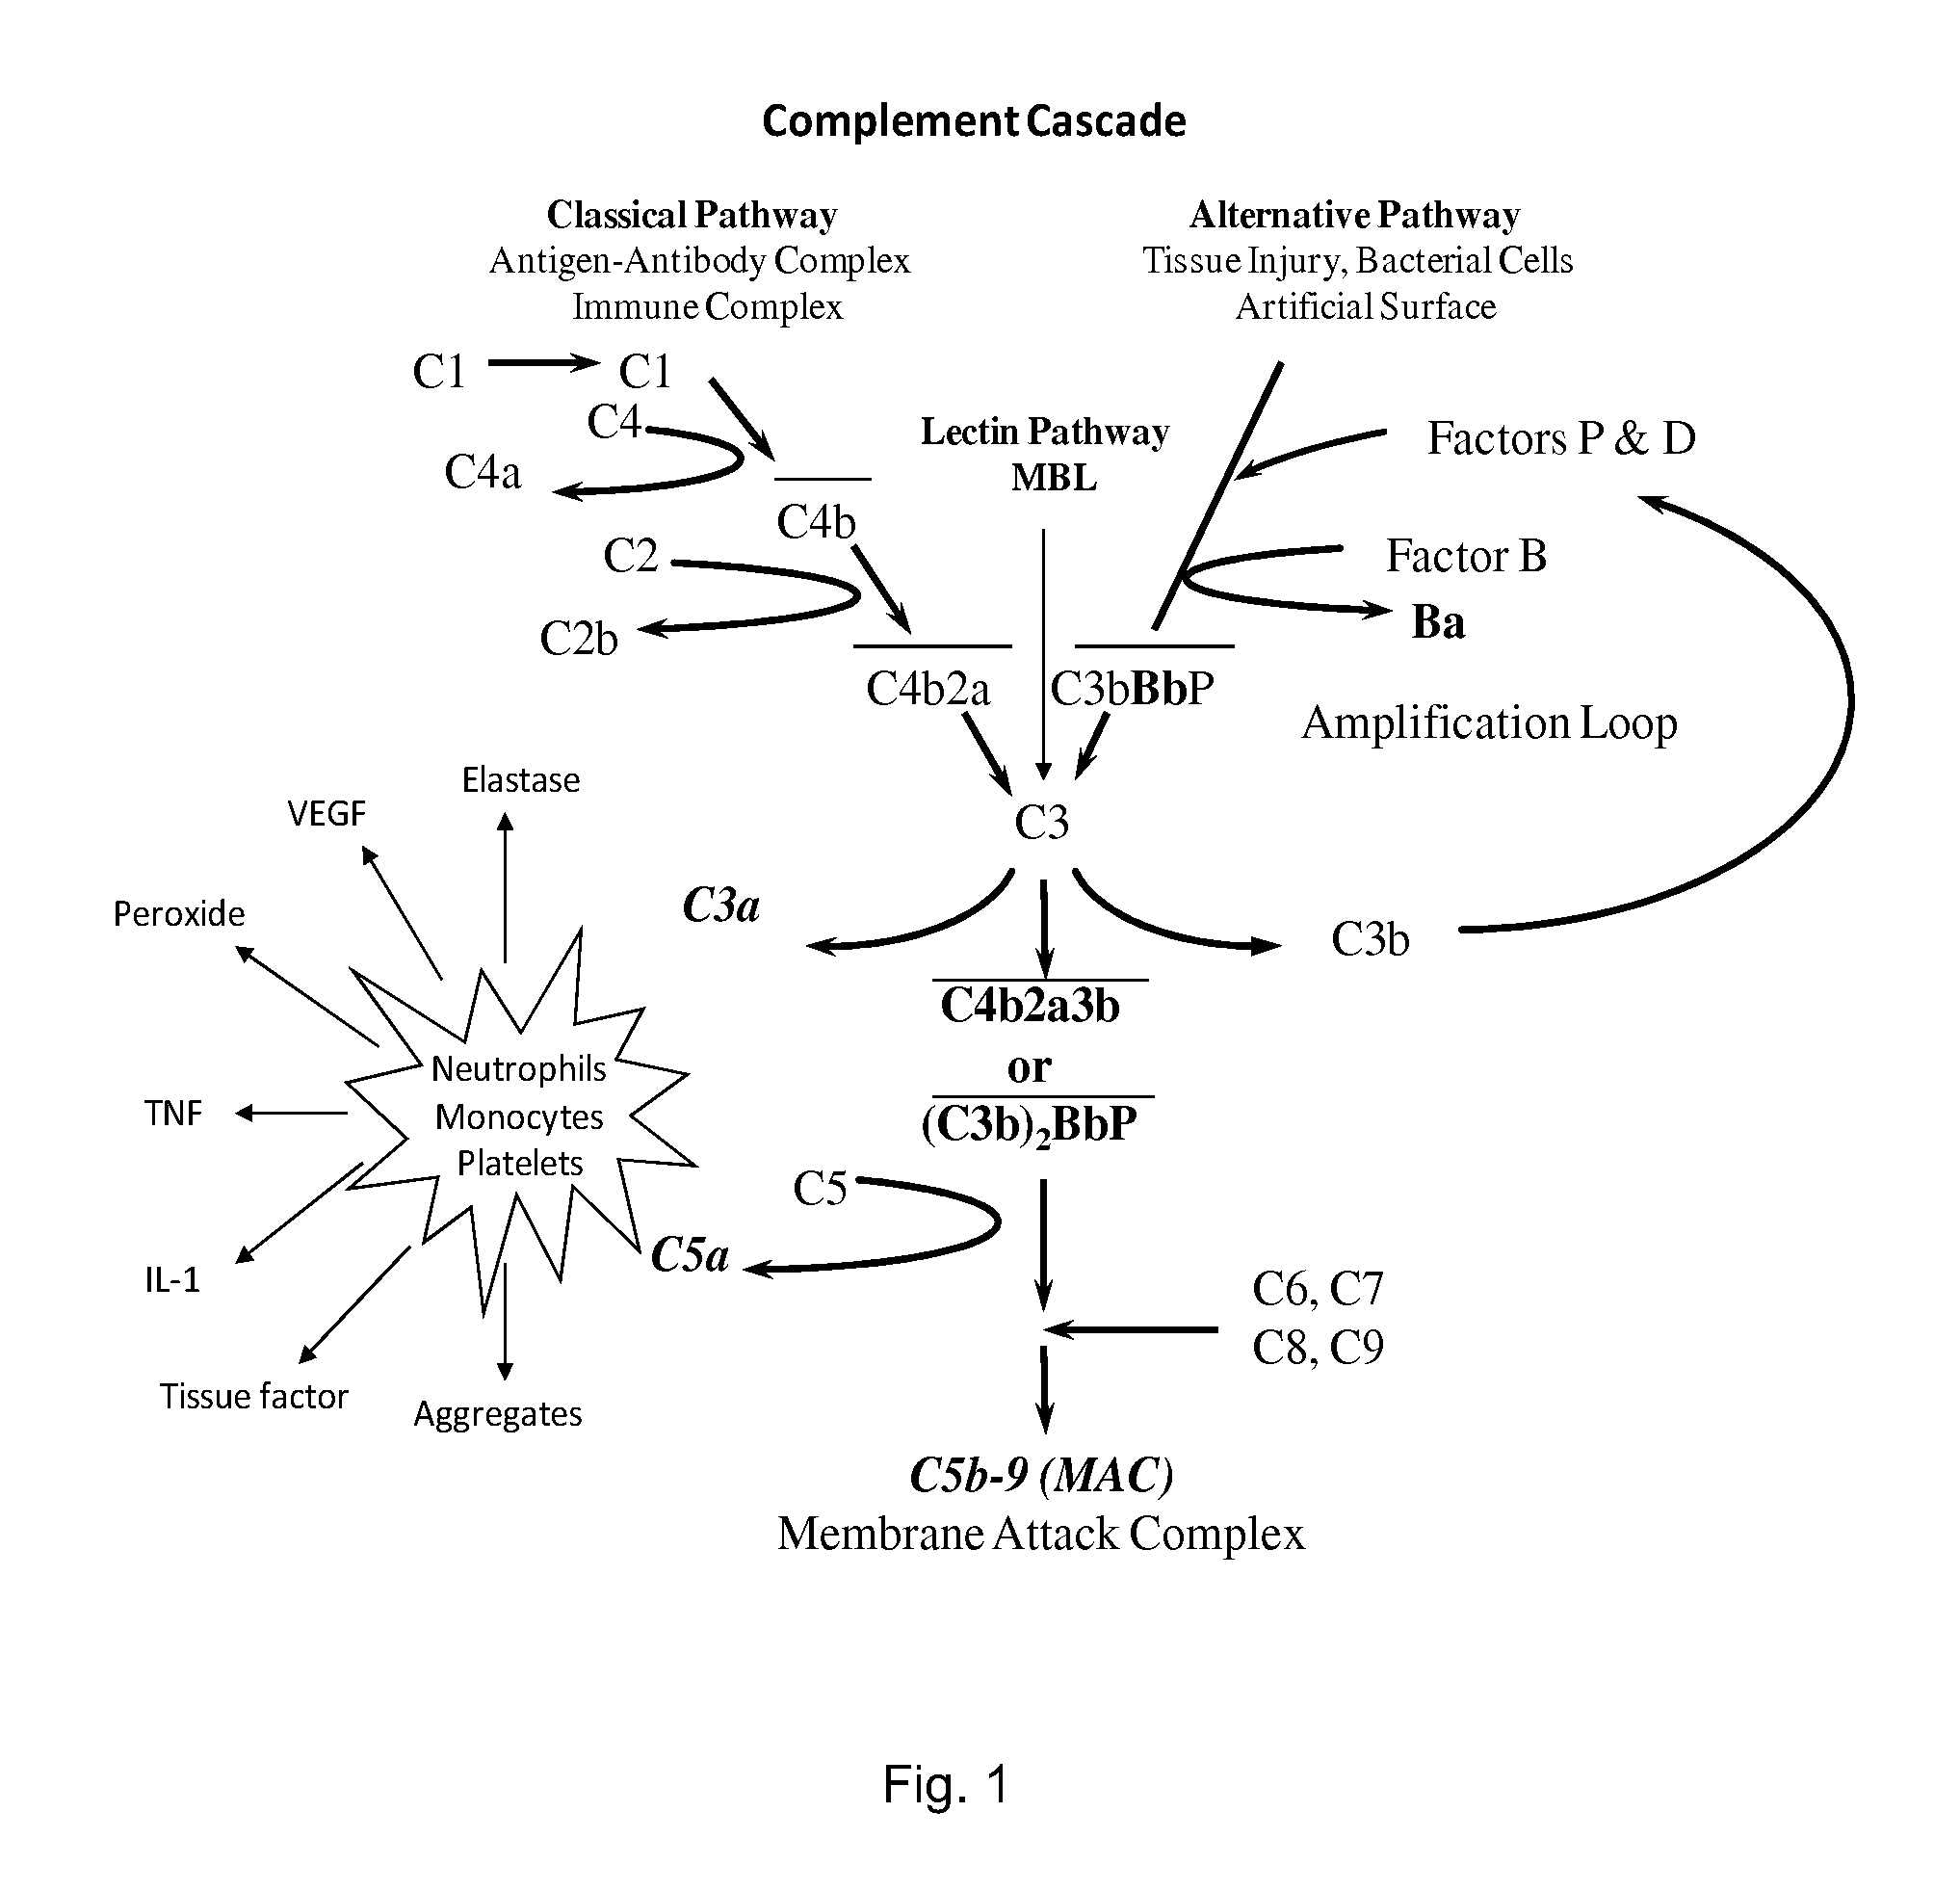 METHOD OF INHIBITING COMPLEMENT ACTIVATION WITH FACTOR Bb SPECIFIC ANTIBODIES